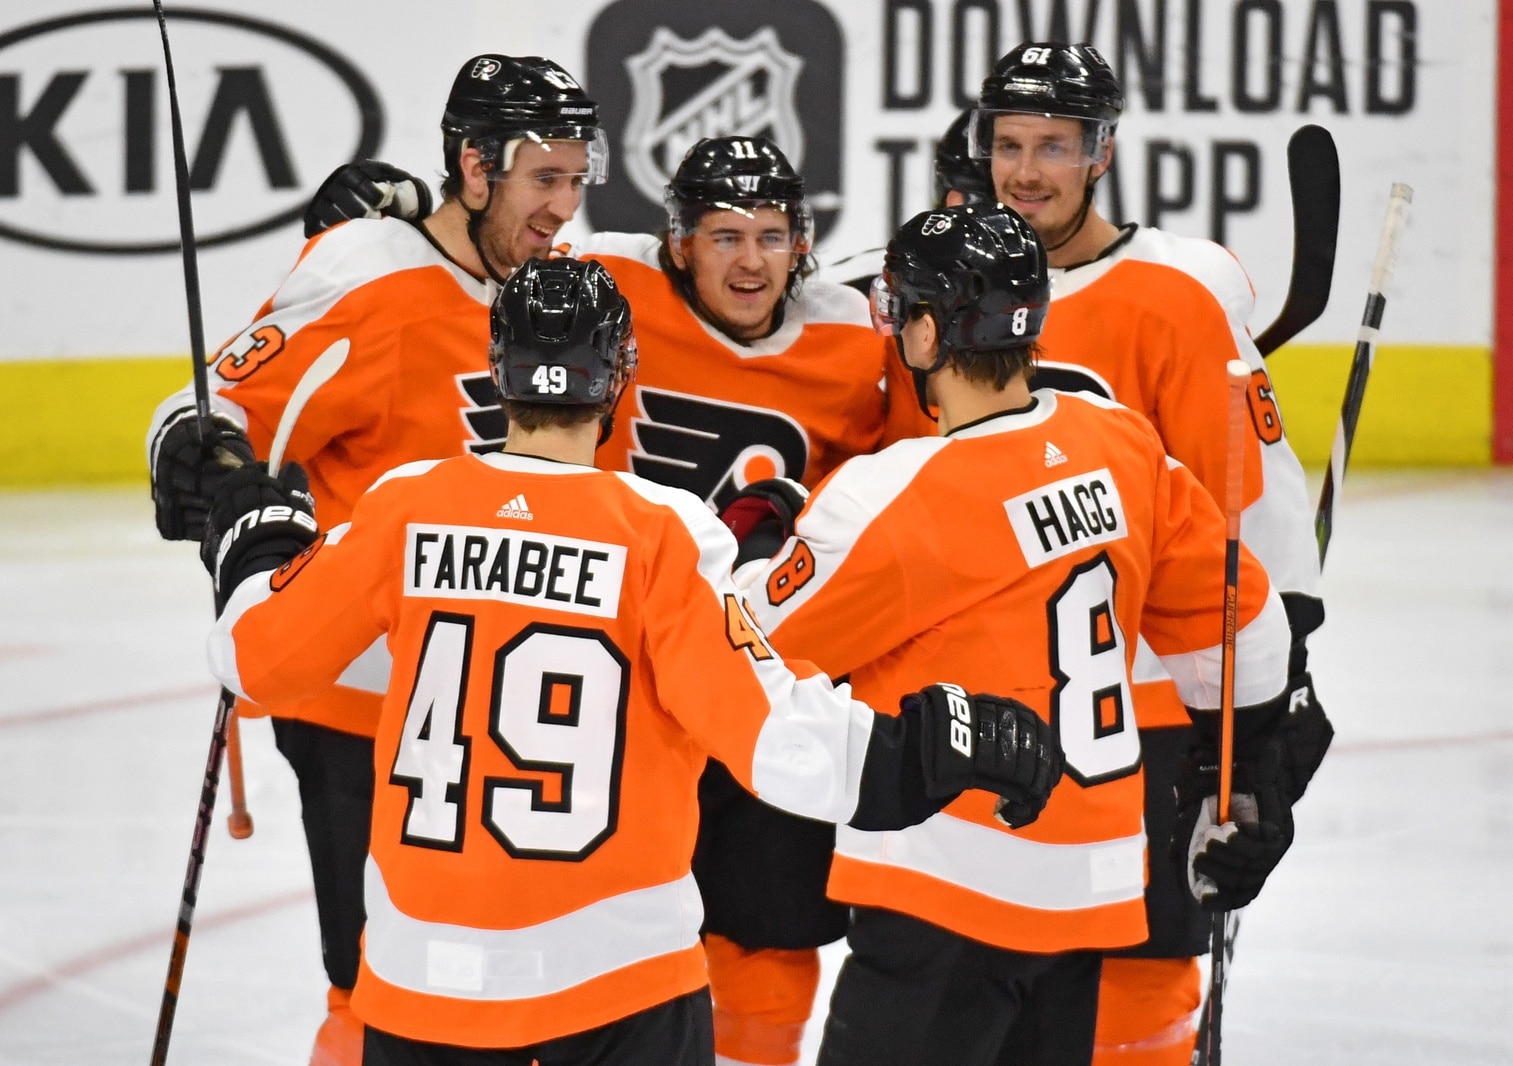 Setting Records: Five Takeaways from the Flyers’ 5-1 Win